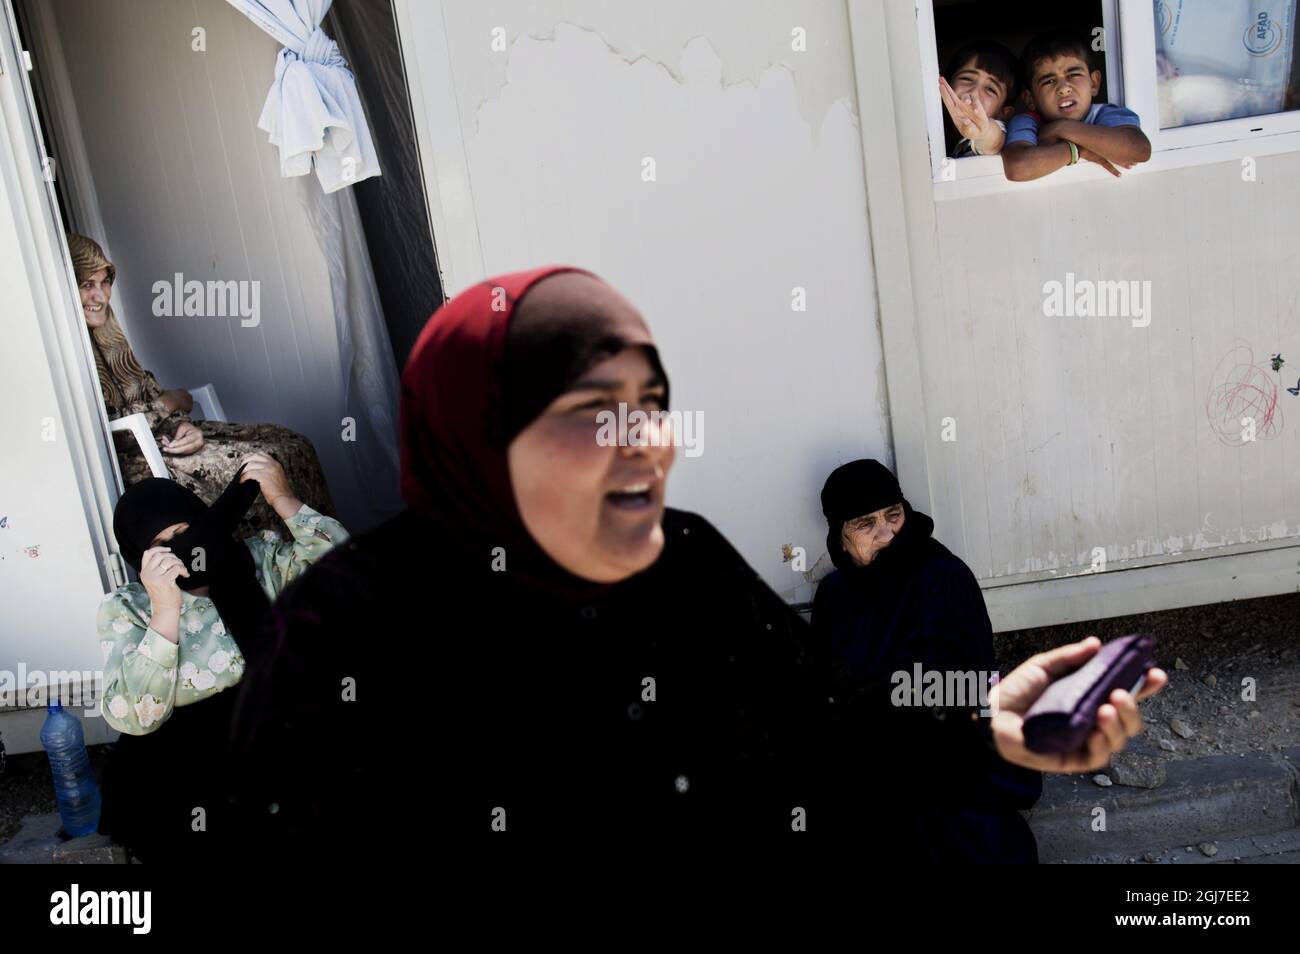 KILIS 2012-07-06 Syrians fleeing across the border into Turkey. Khawla lives with her eight children in one of the barracks in the refugee camp in Kilis, Turkey. Photo: Anders Hansson / DN / SCANPIX code 9278 Stock Photo